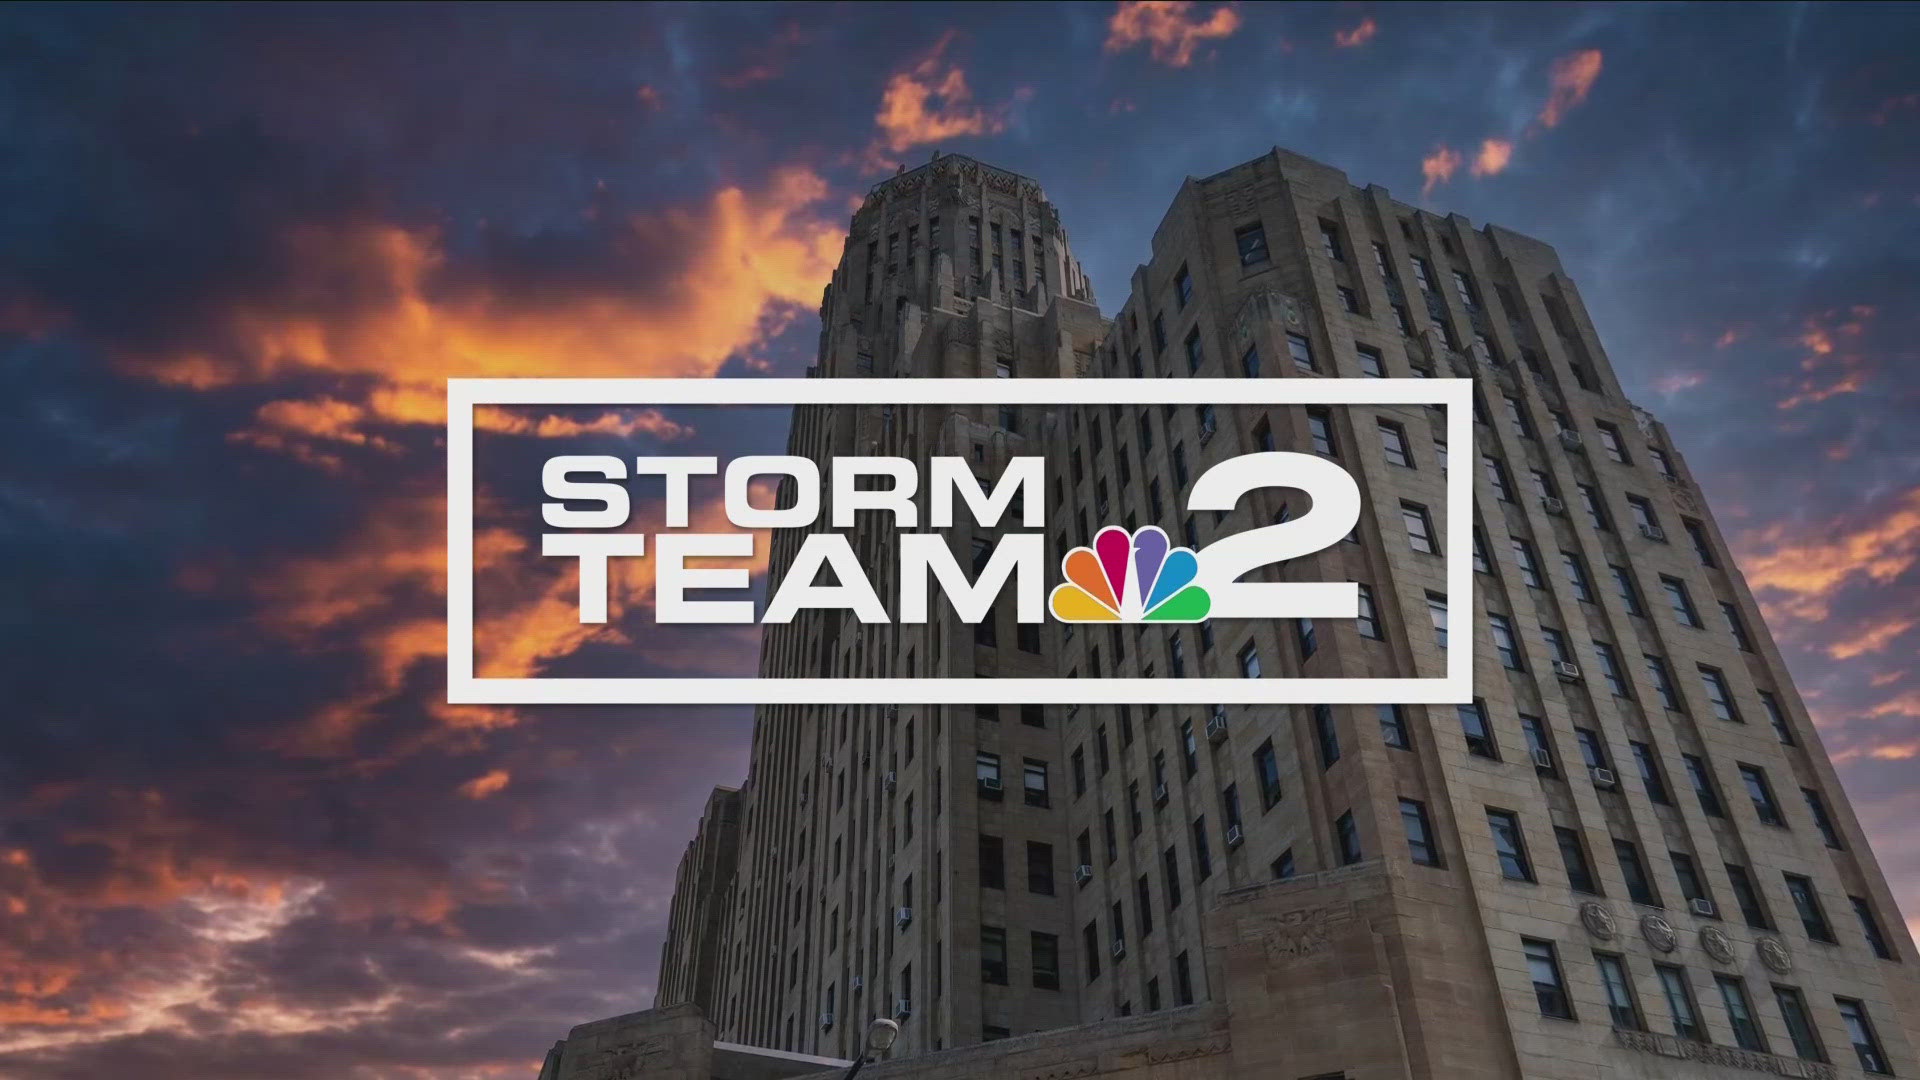 Storm Team 2 night forecast with Paul Hare for Sunday, May 12.